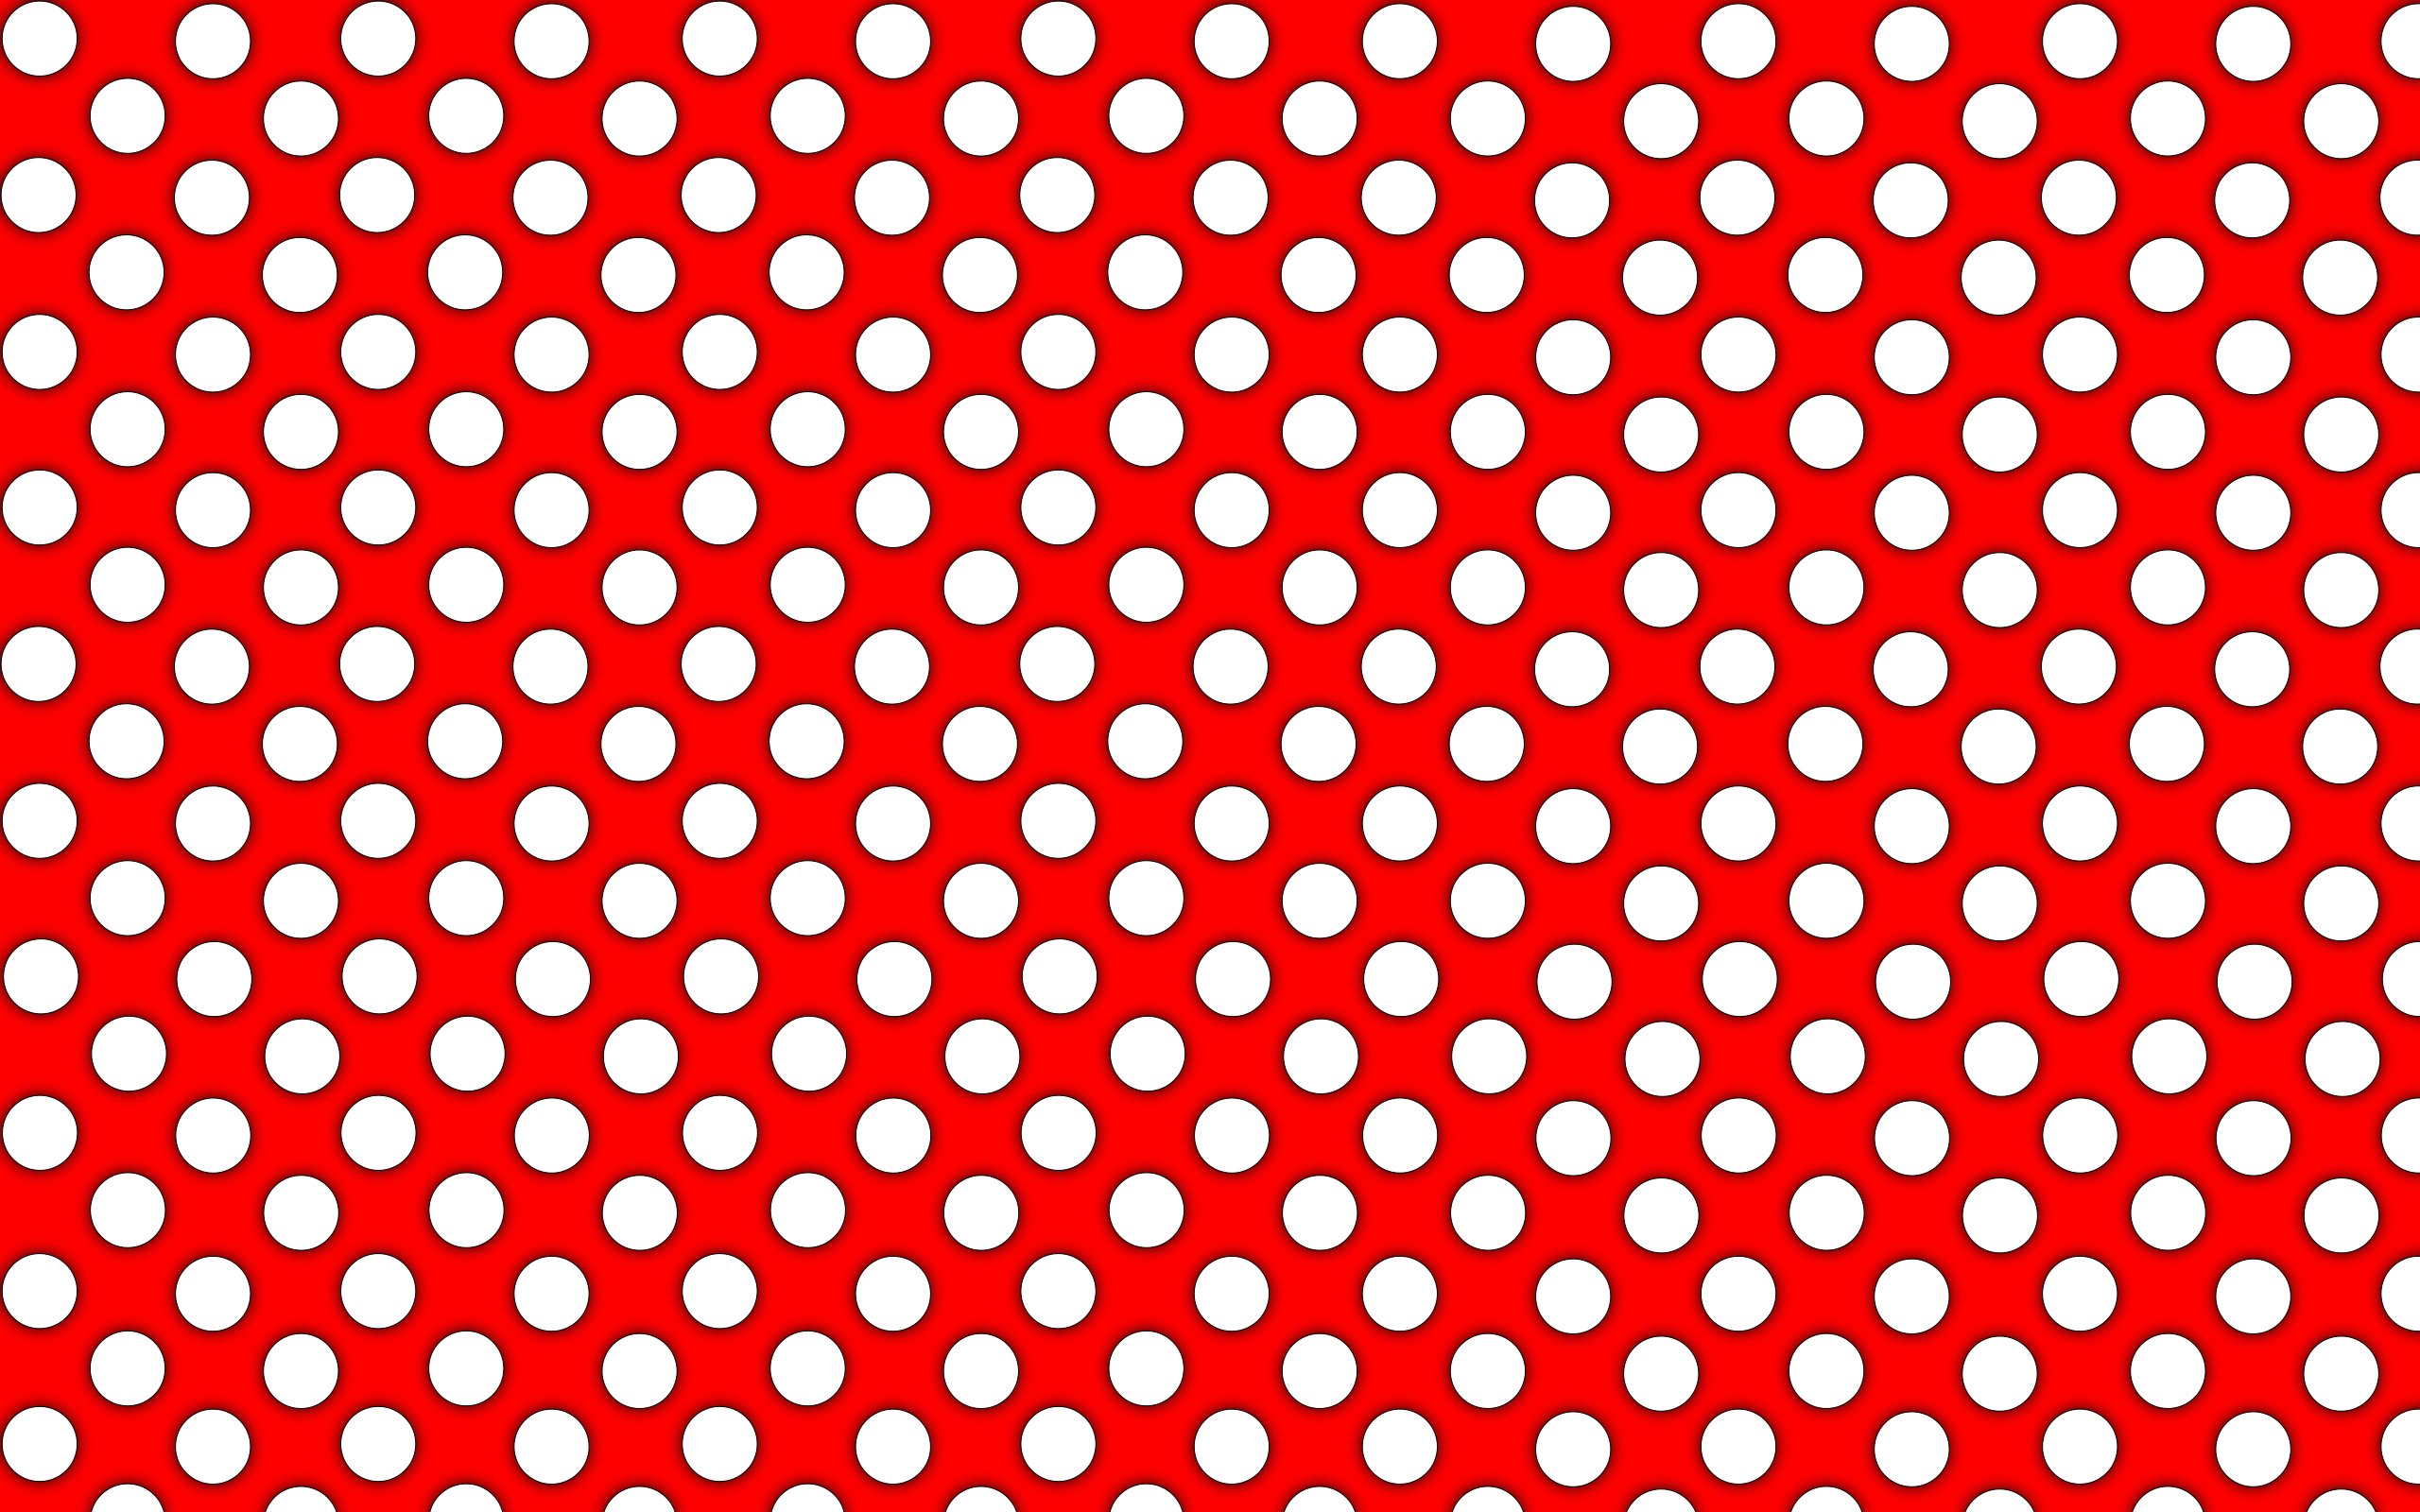 HD Wallpaper Polka Dot Card Stock For Gt Red Dots